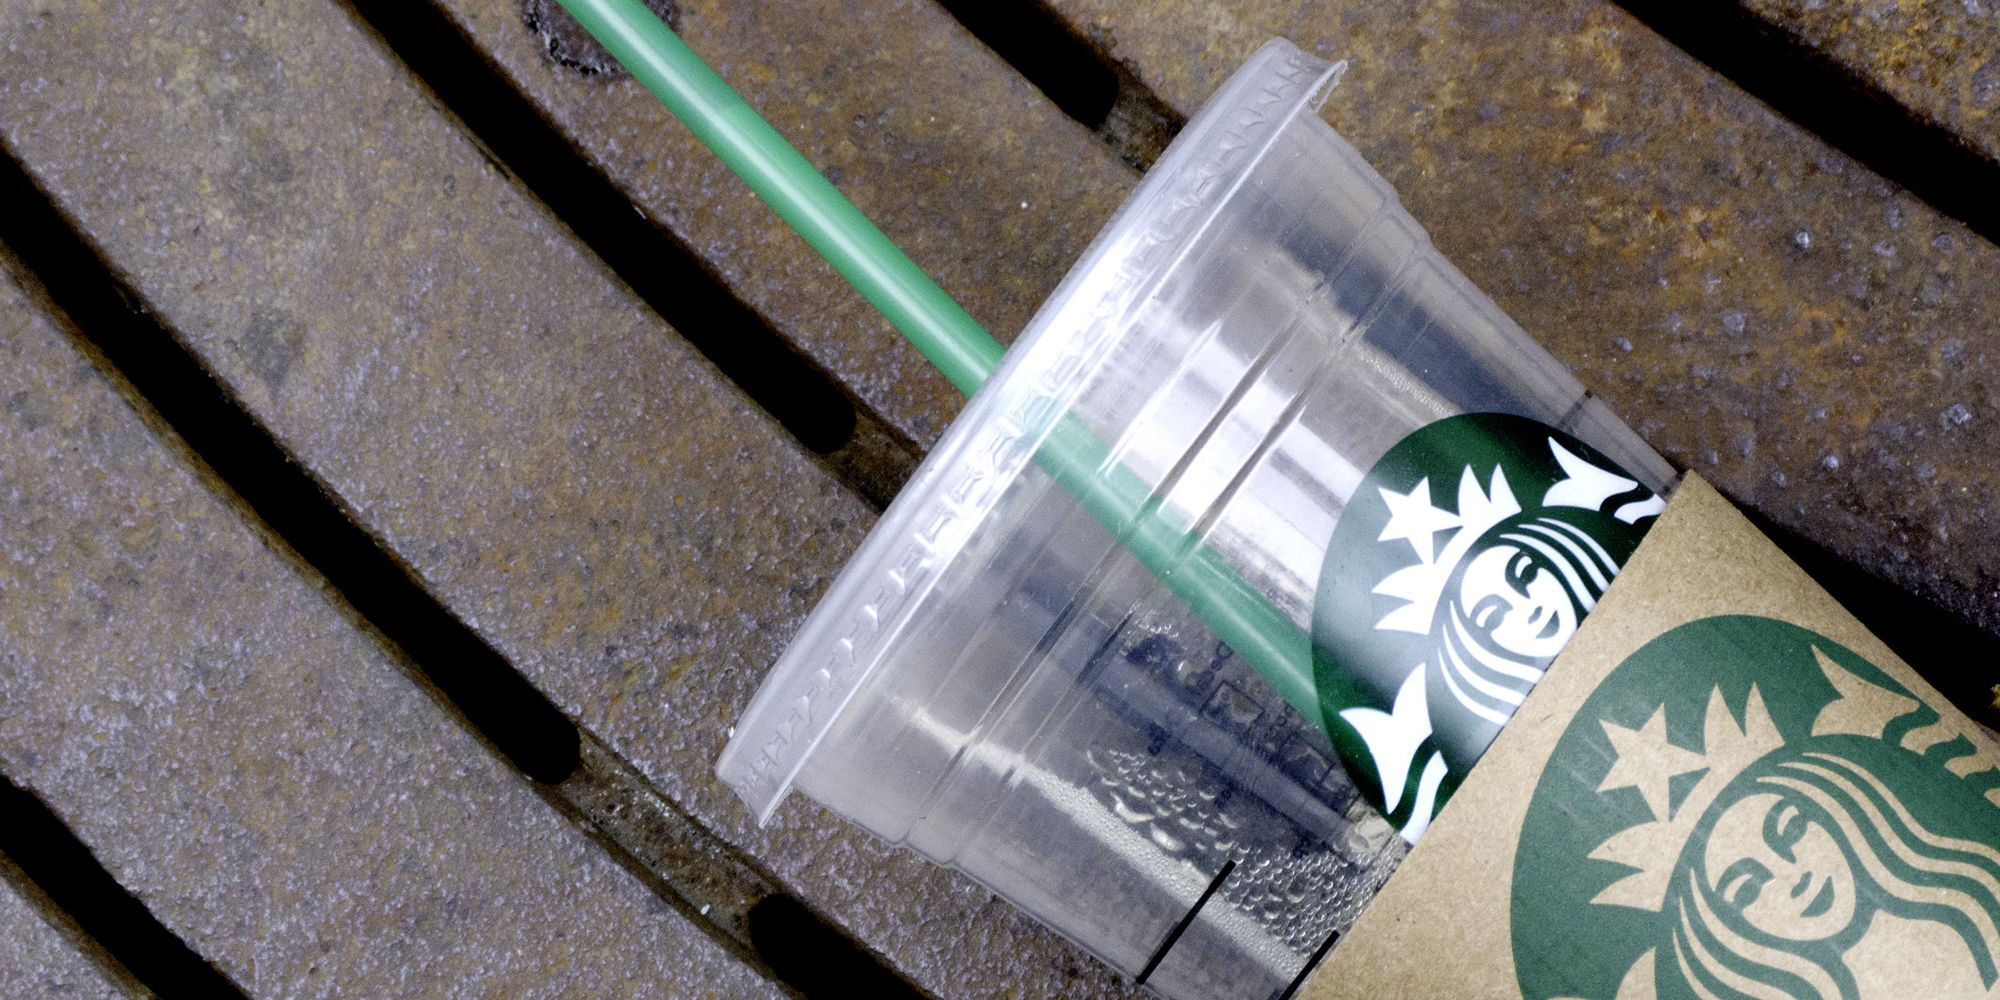 Starbucks to replace Plastics Straws by Paper and Biodegradable